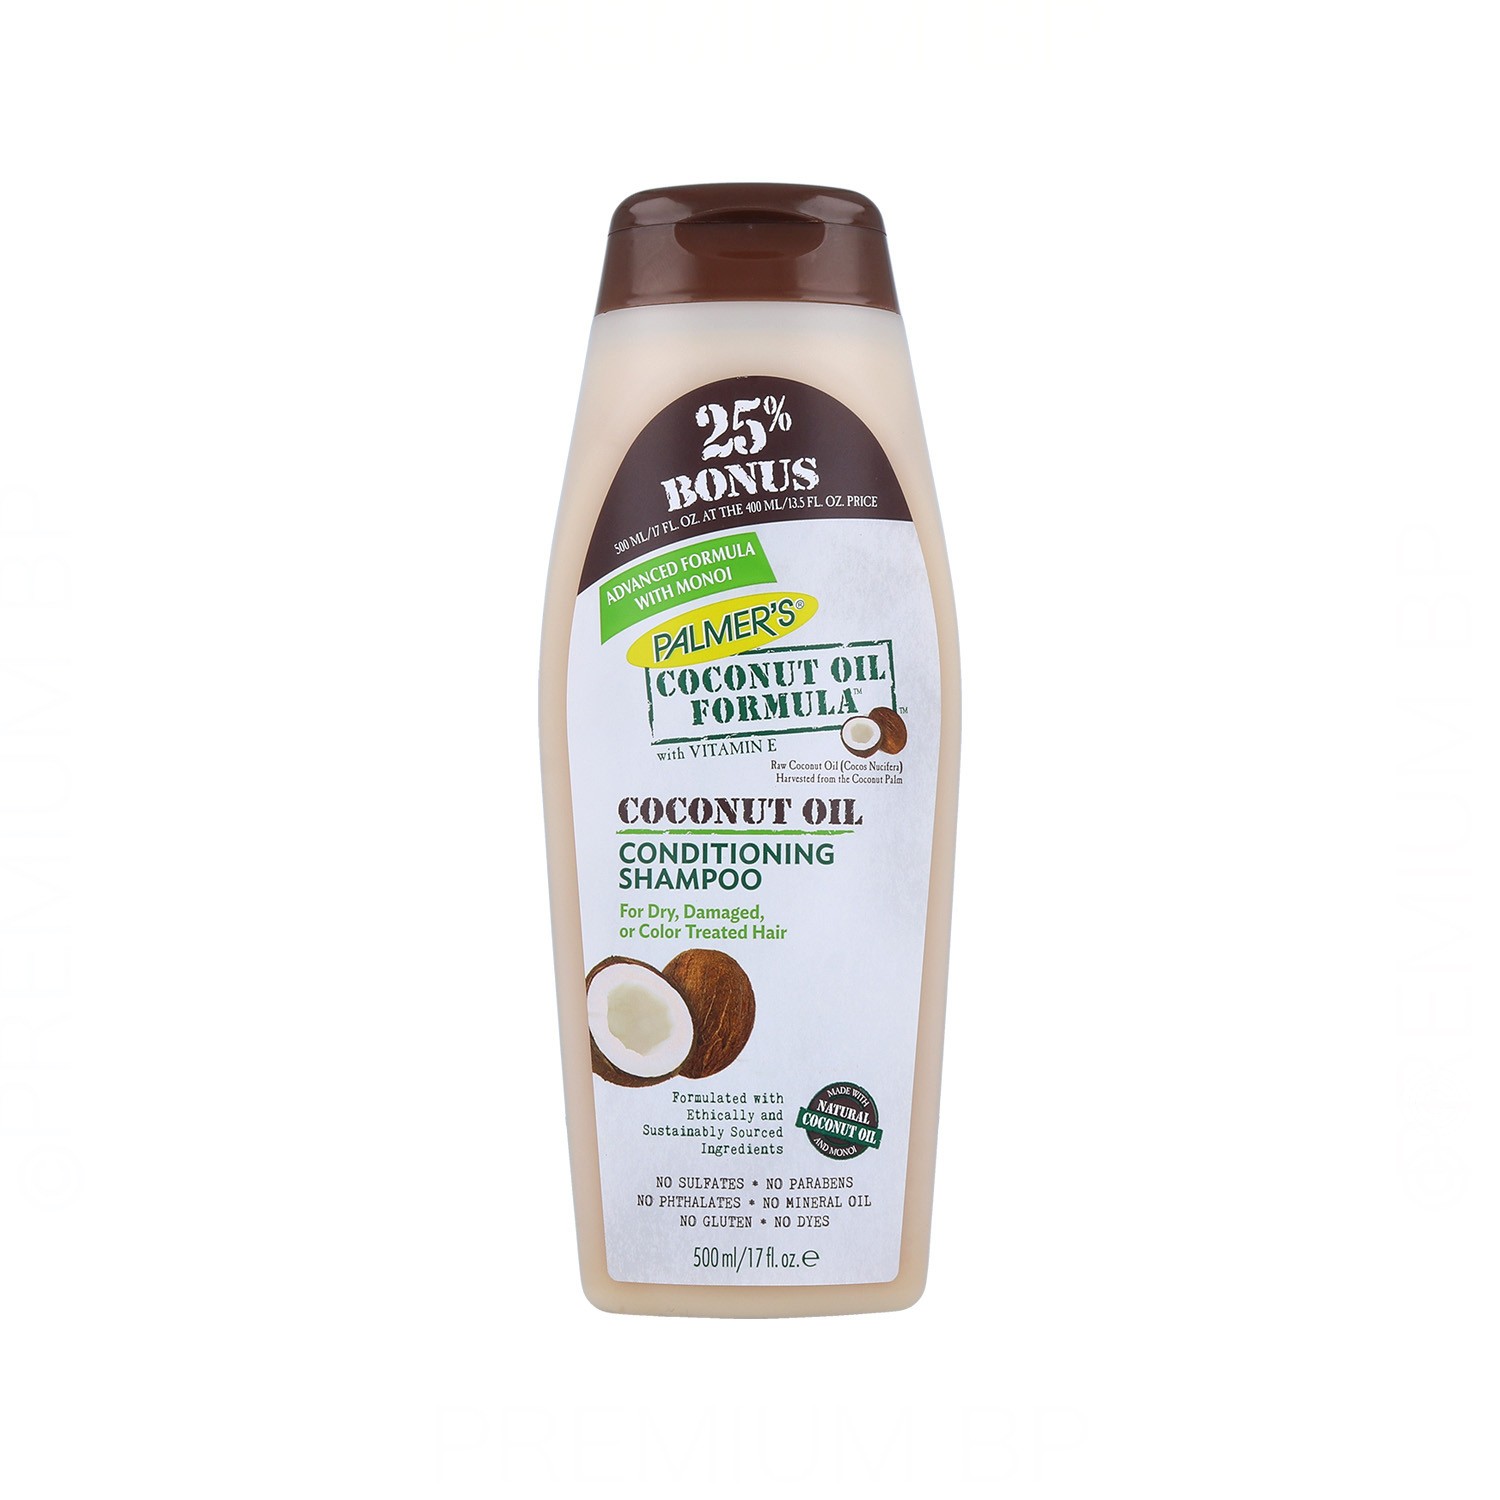 Palmers Coconut Oil Shampoo Conditioning 400 ml